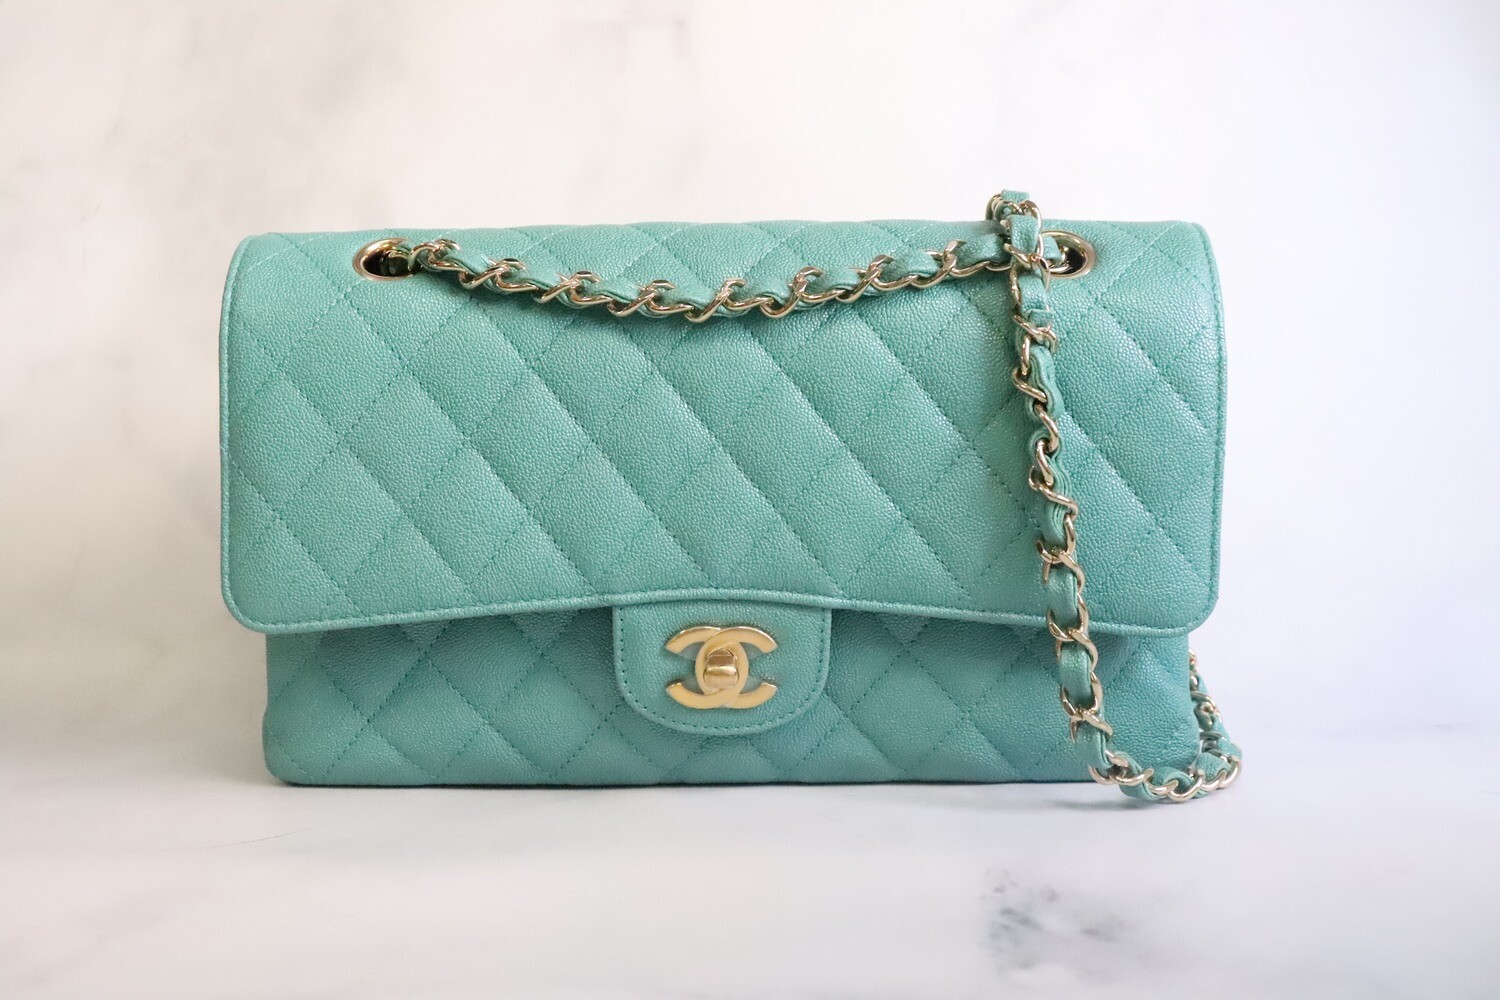 Chanel Classic Medium Double Flap, 19S Turquoise Green Iridescent Caviar  Leather, Shiny Gold Hardware, Preowned in Box